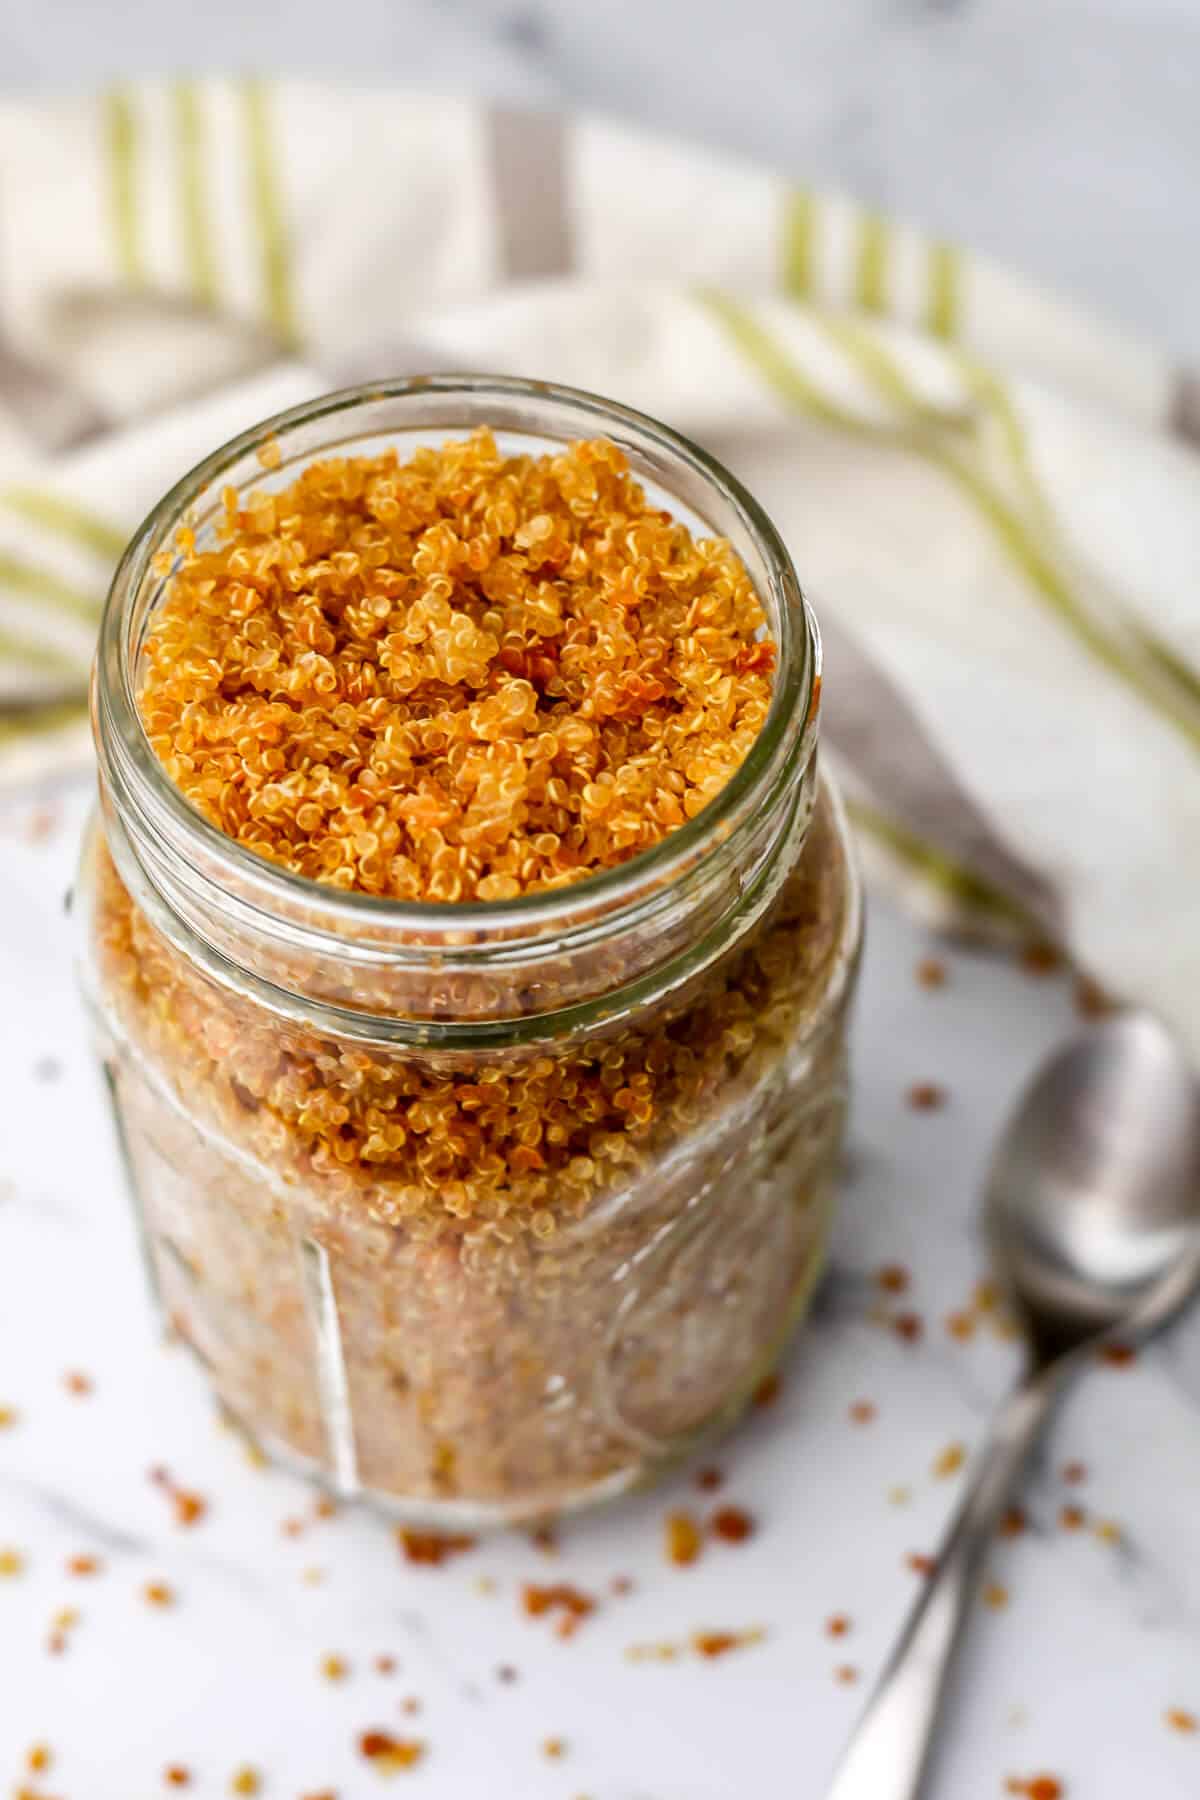 A glass jar full of crunchy quinoa with a spoon on the side and a tea towel behind it.